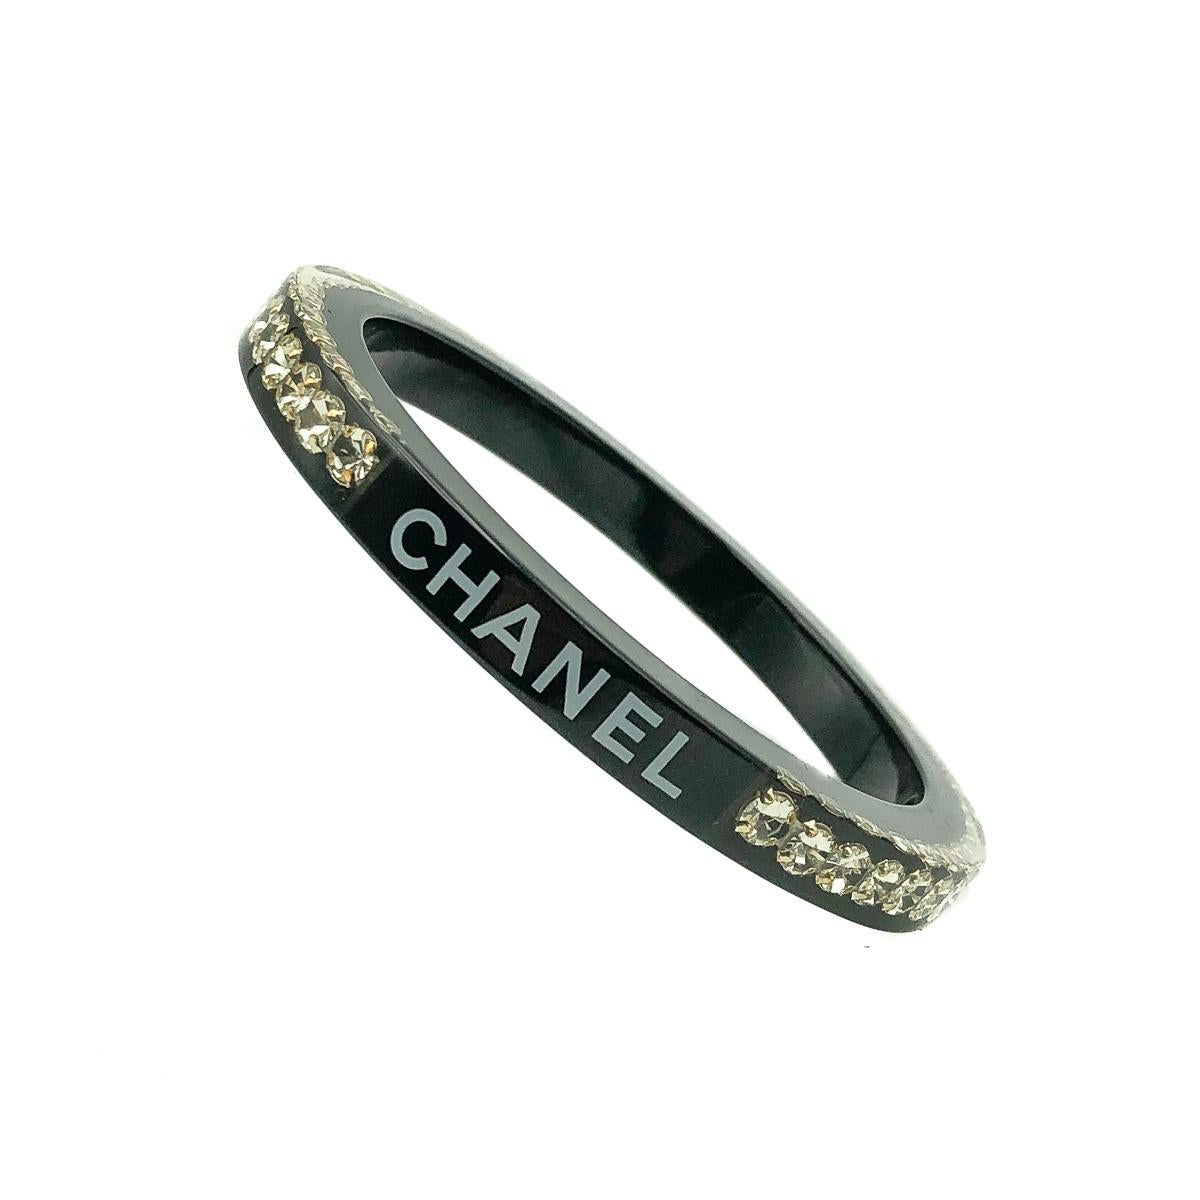 A Chanel Logo Rhinestone Bangle. Featuring the iconic name CHANEL imprinted twice and beautifully interspersed with crystal chaton stones suspended within the resin glinting and glistening to perfection.
Since 1910 when Gabrielle 'Coco' Chanel